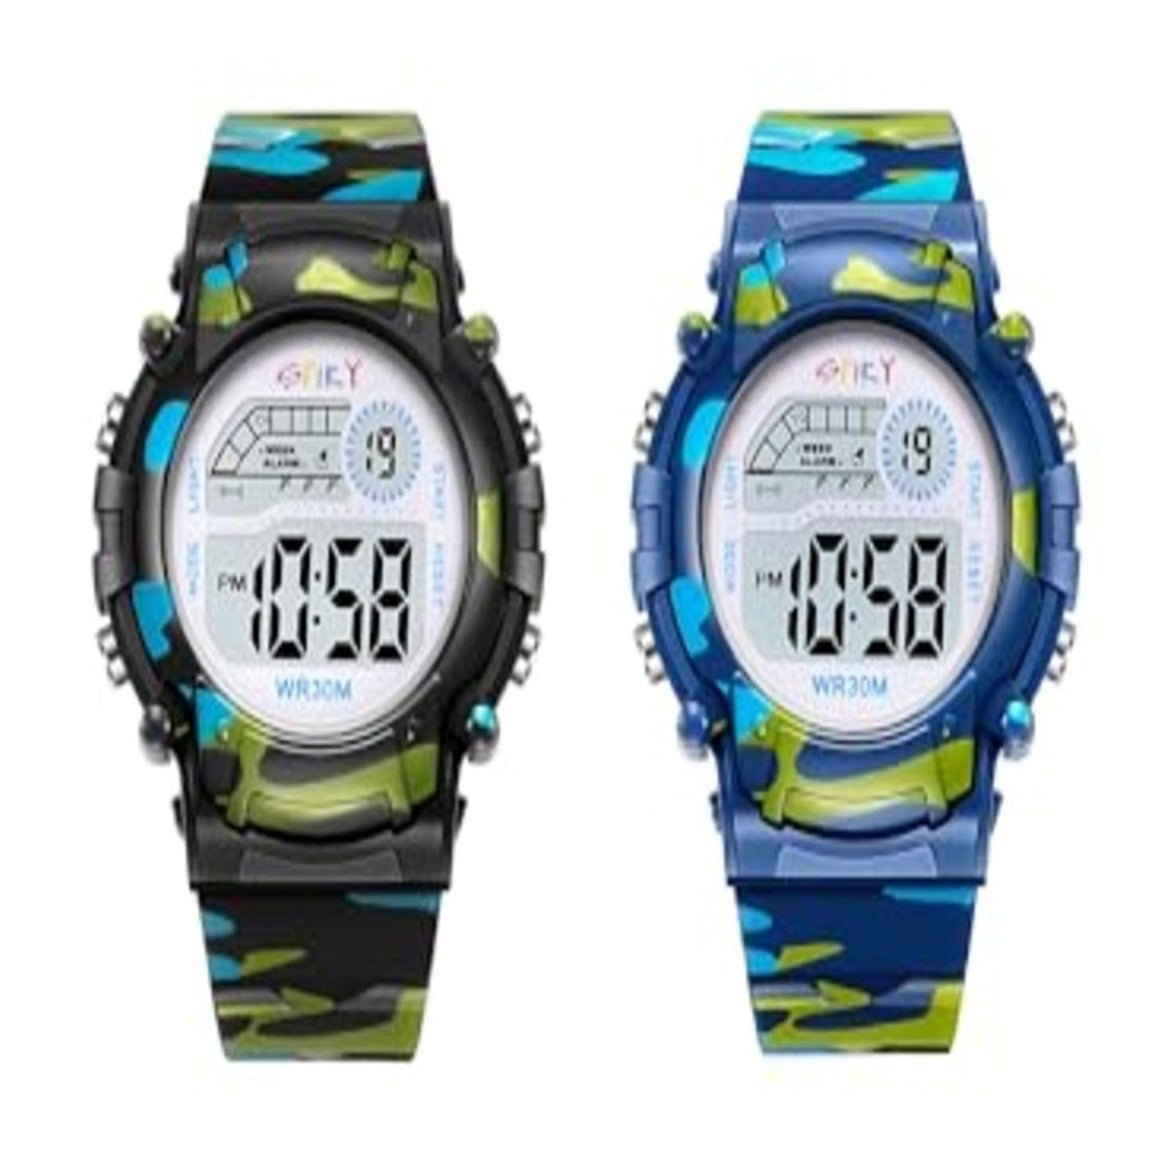 Spiky Round Military Design Kids Digital Watches Combo - Black & Blue